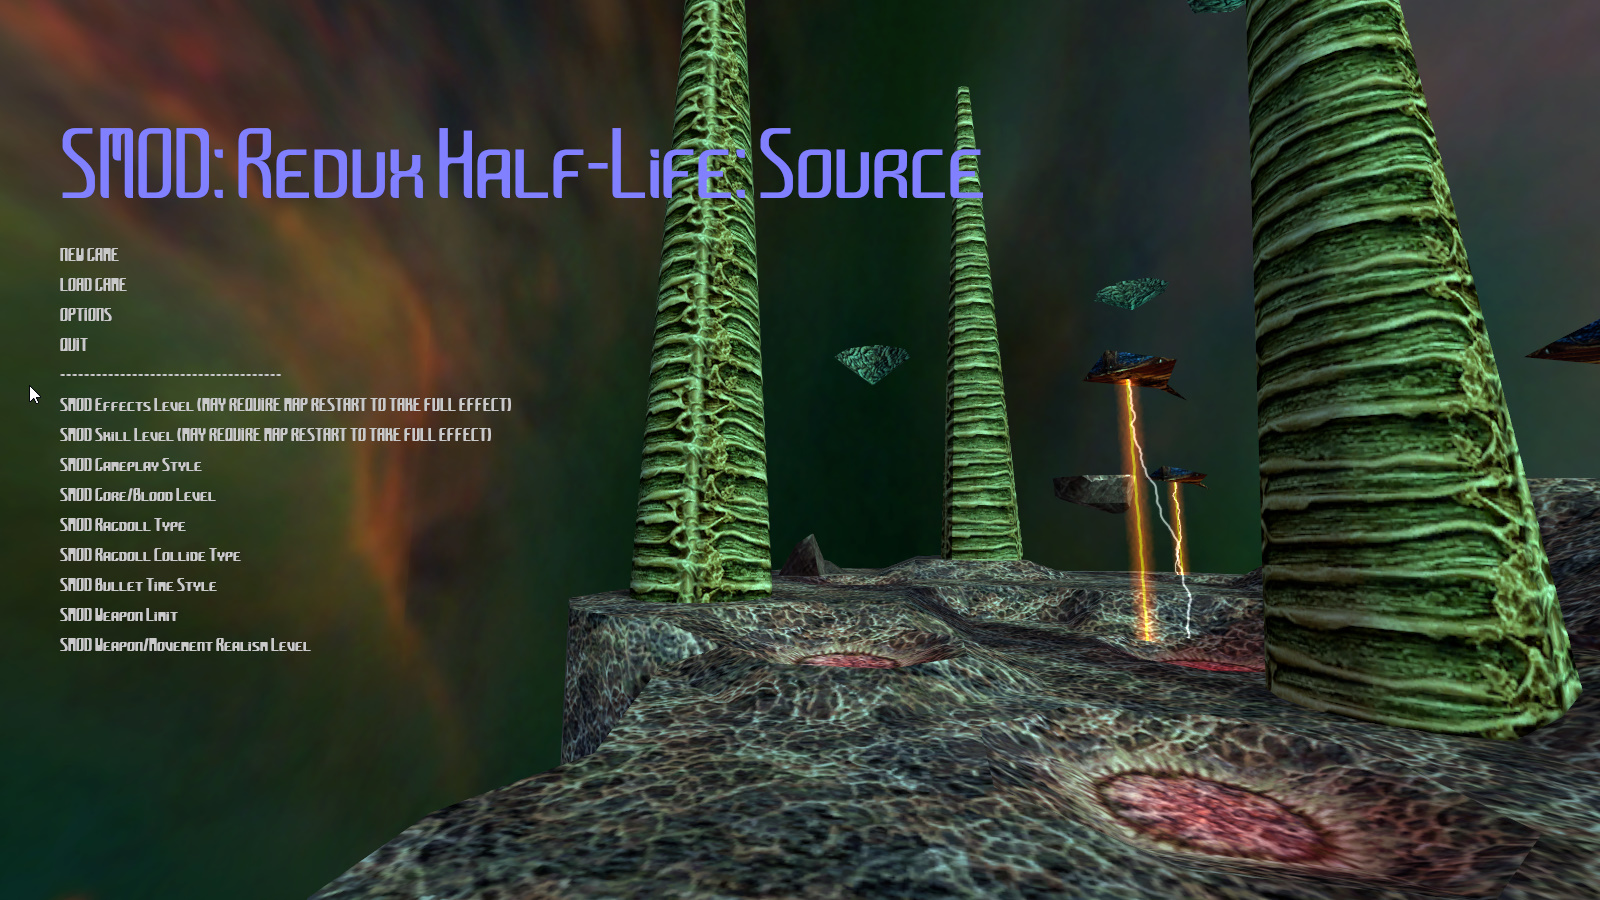 when was half life source released